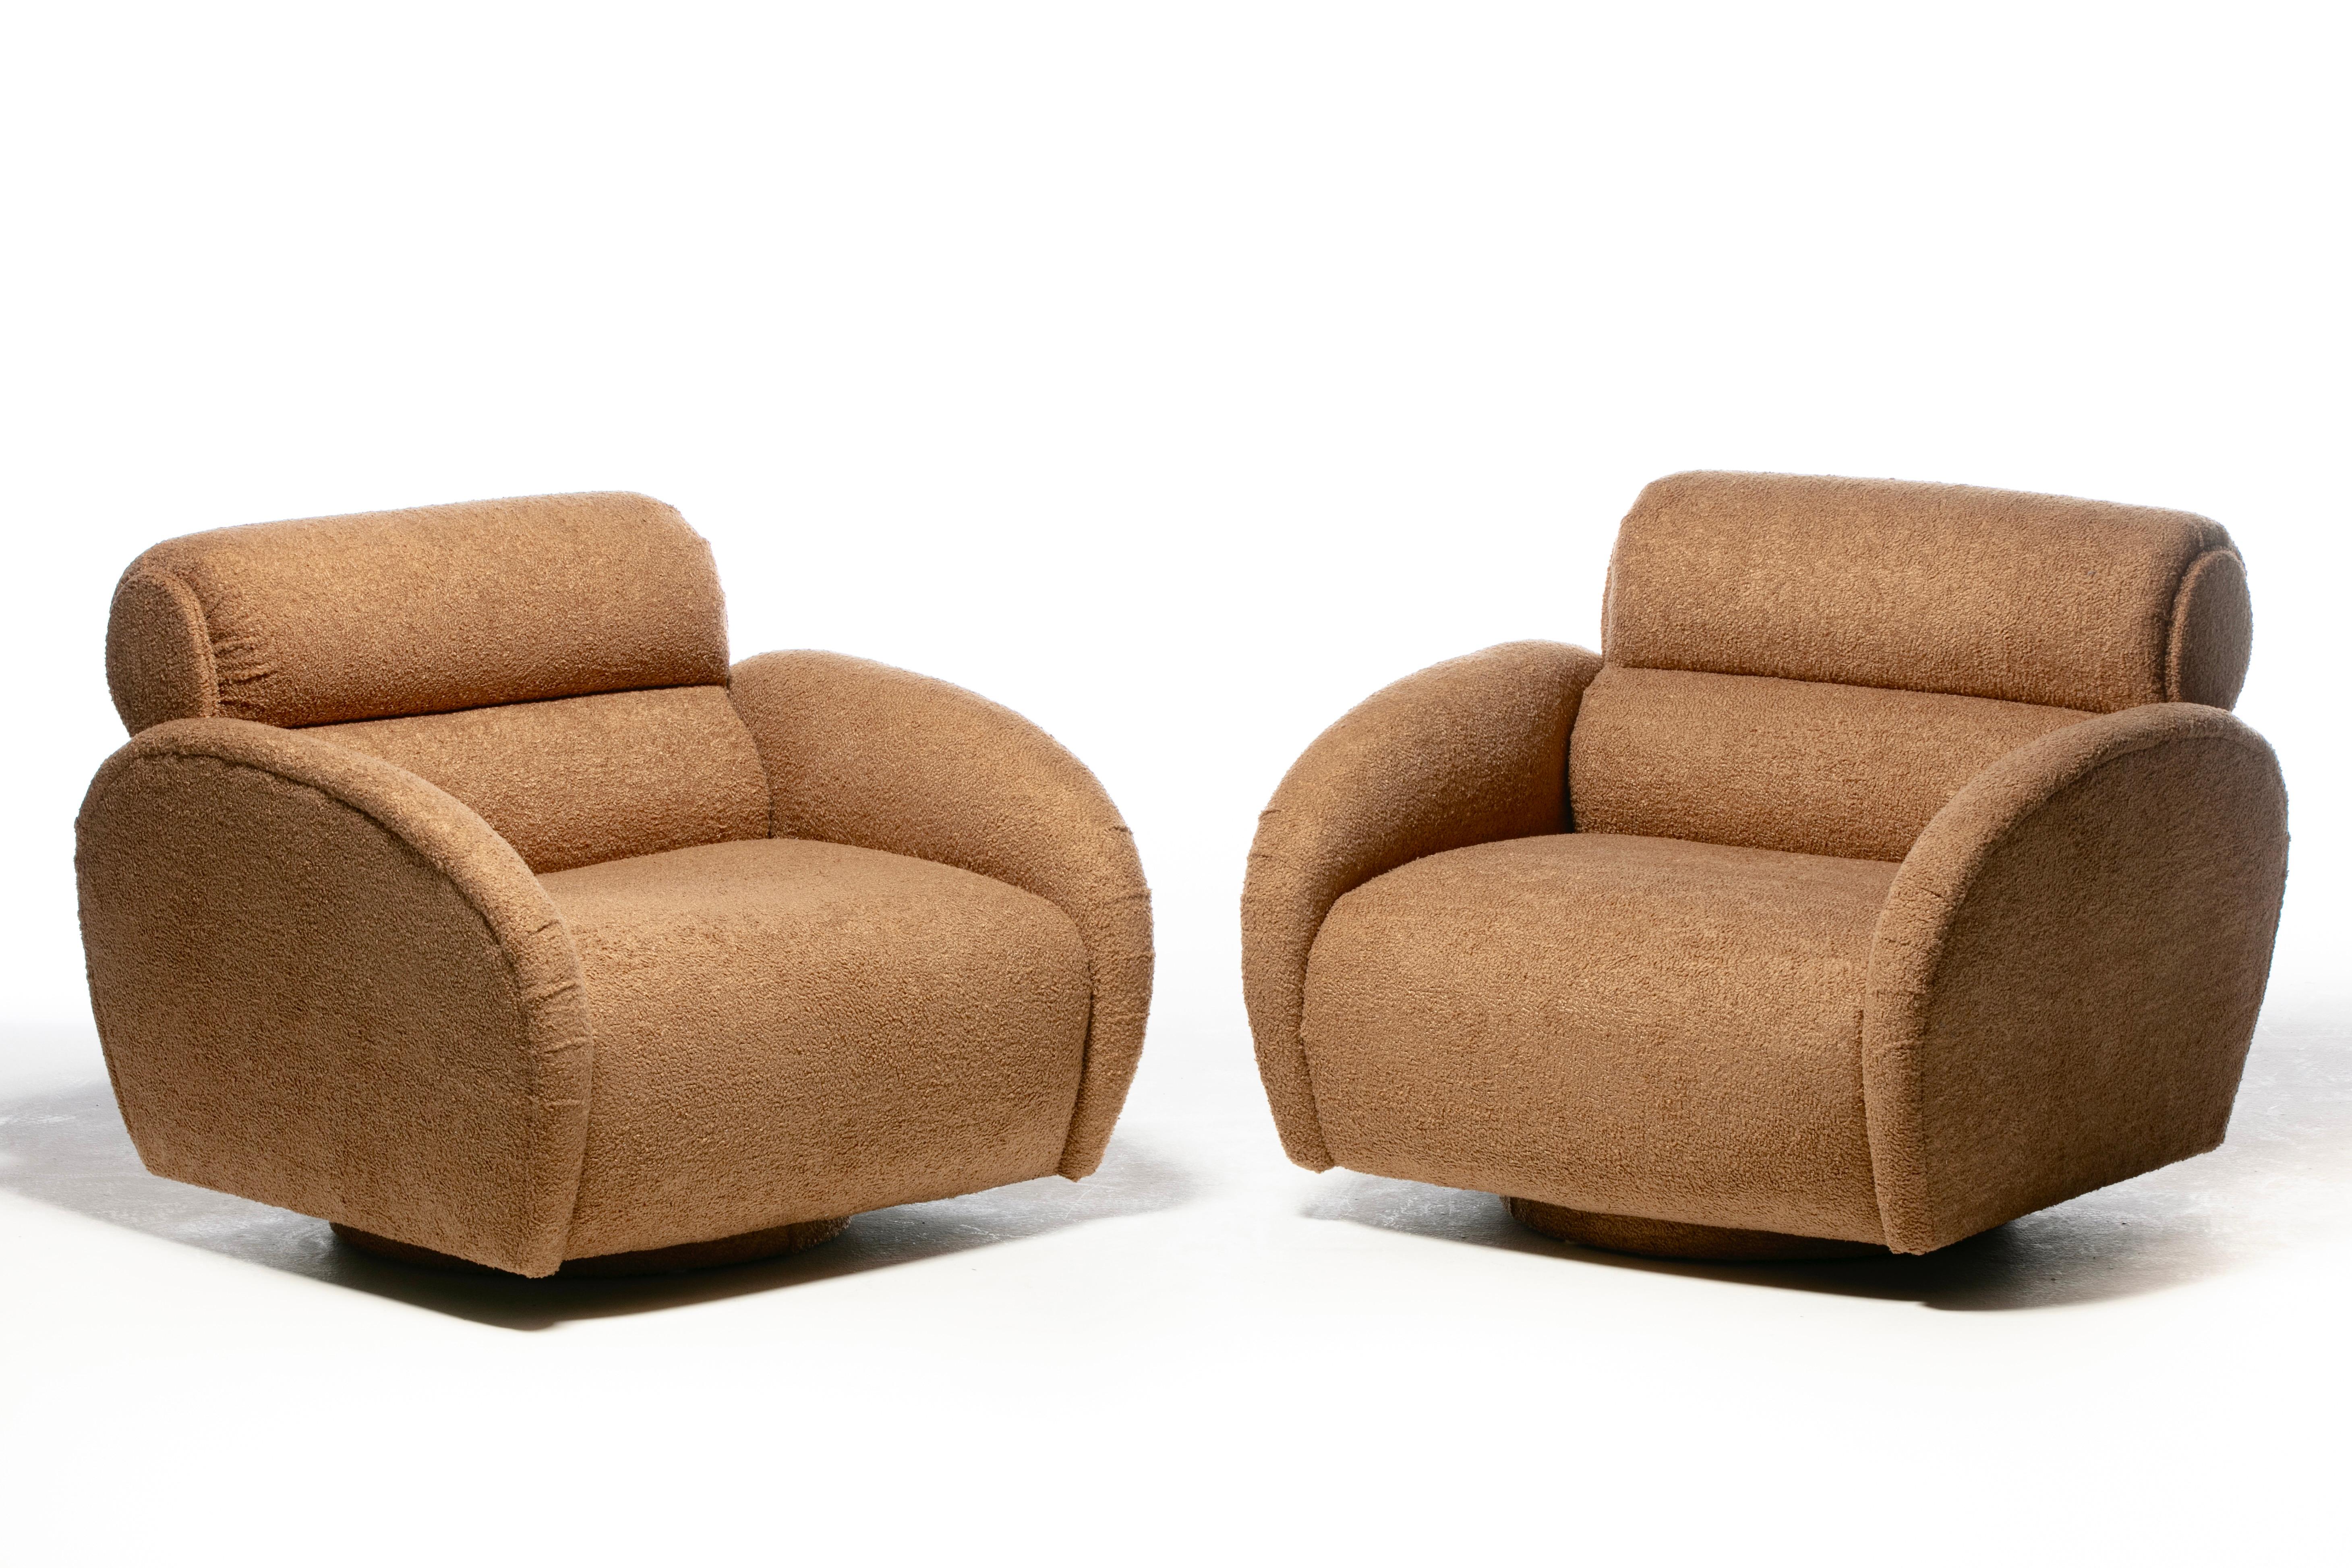 Large Scale Directional Post Modern Swivel Chairs & Ottoman in Mocha Fabric In Good Condition For Sale In Saint Louis, MO